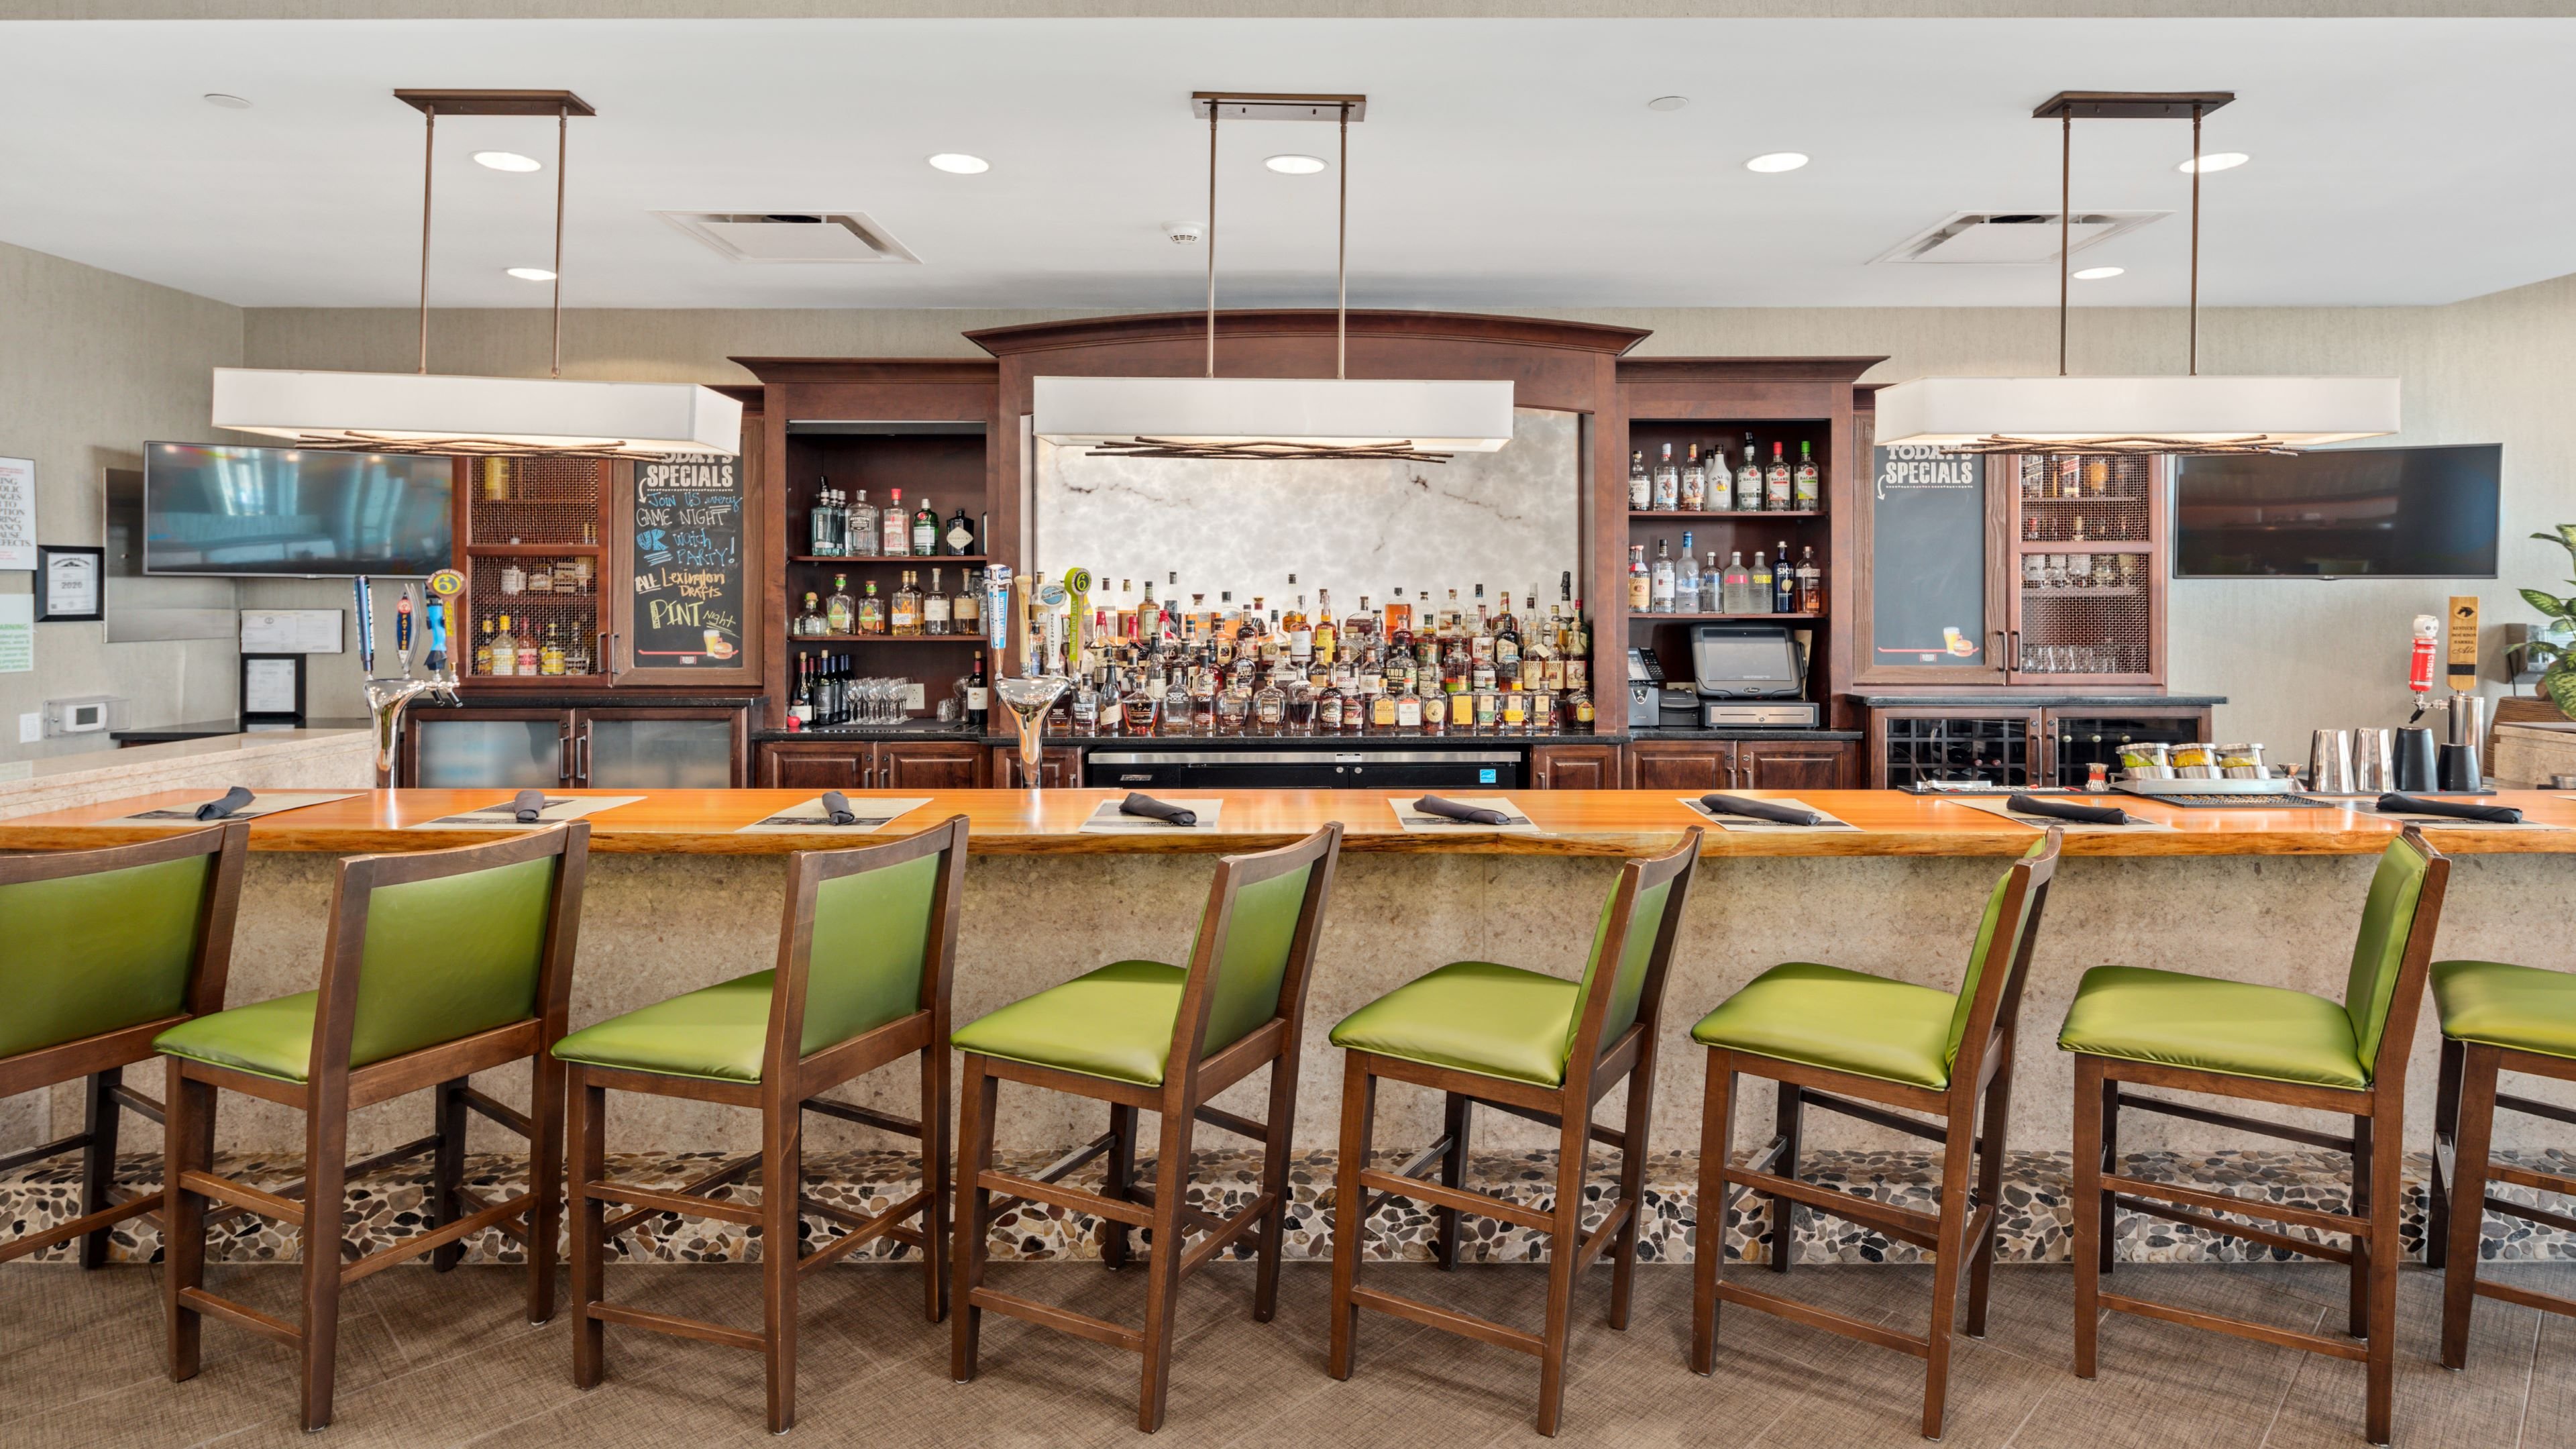 Our bar offers over 20 bourbons and local brews to choose from